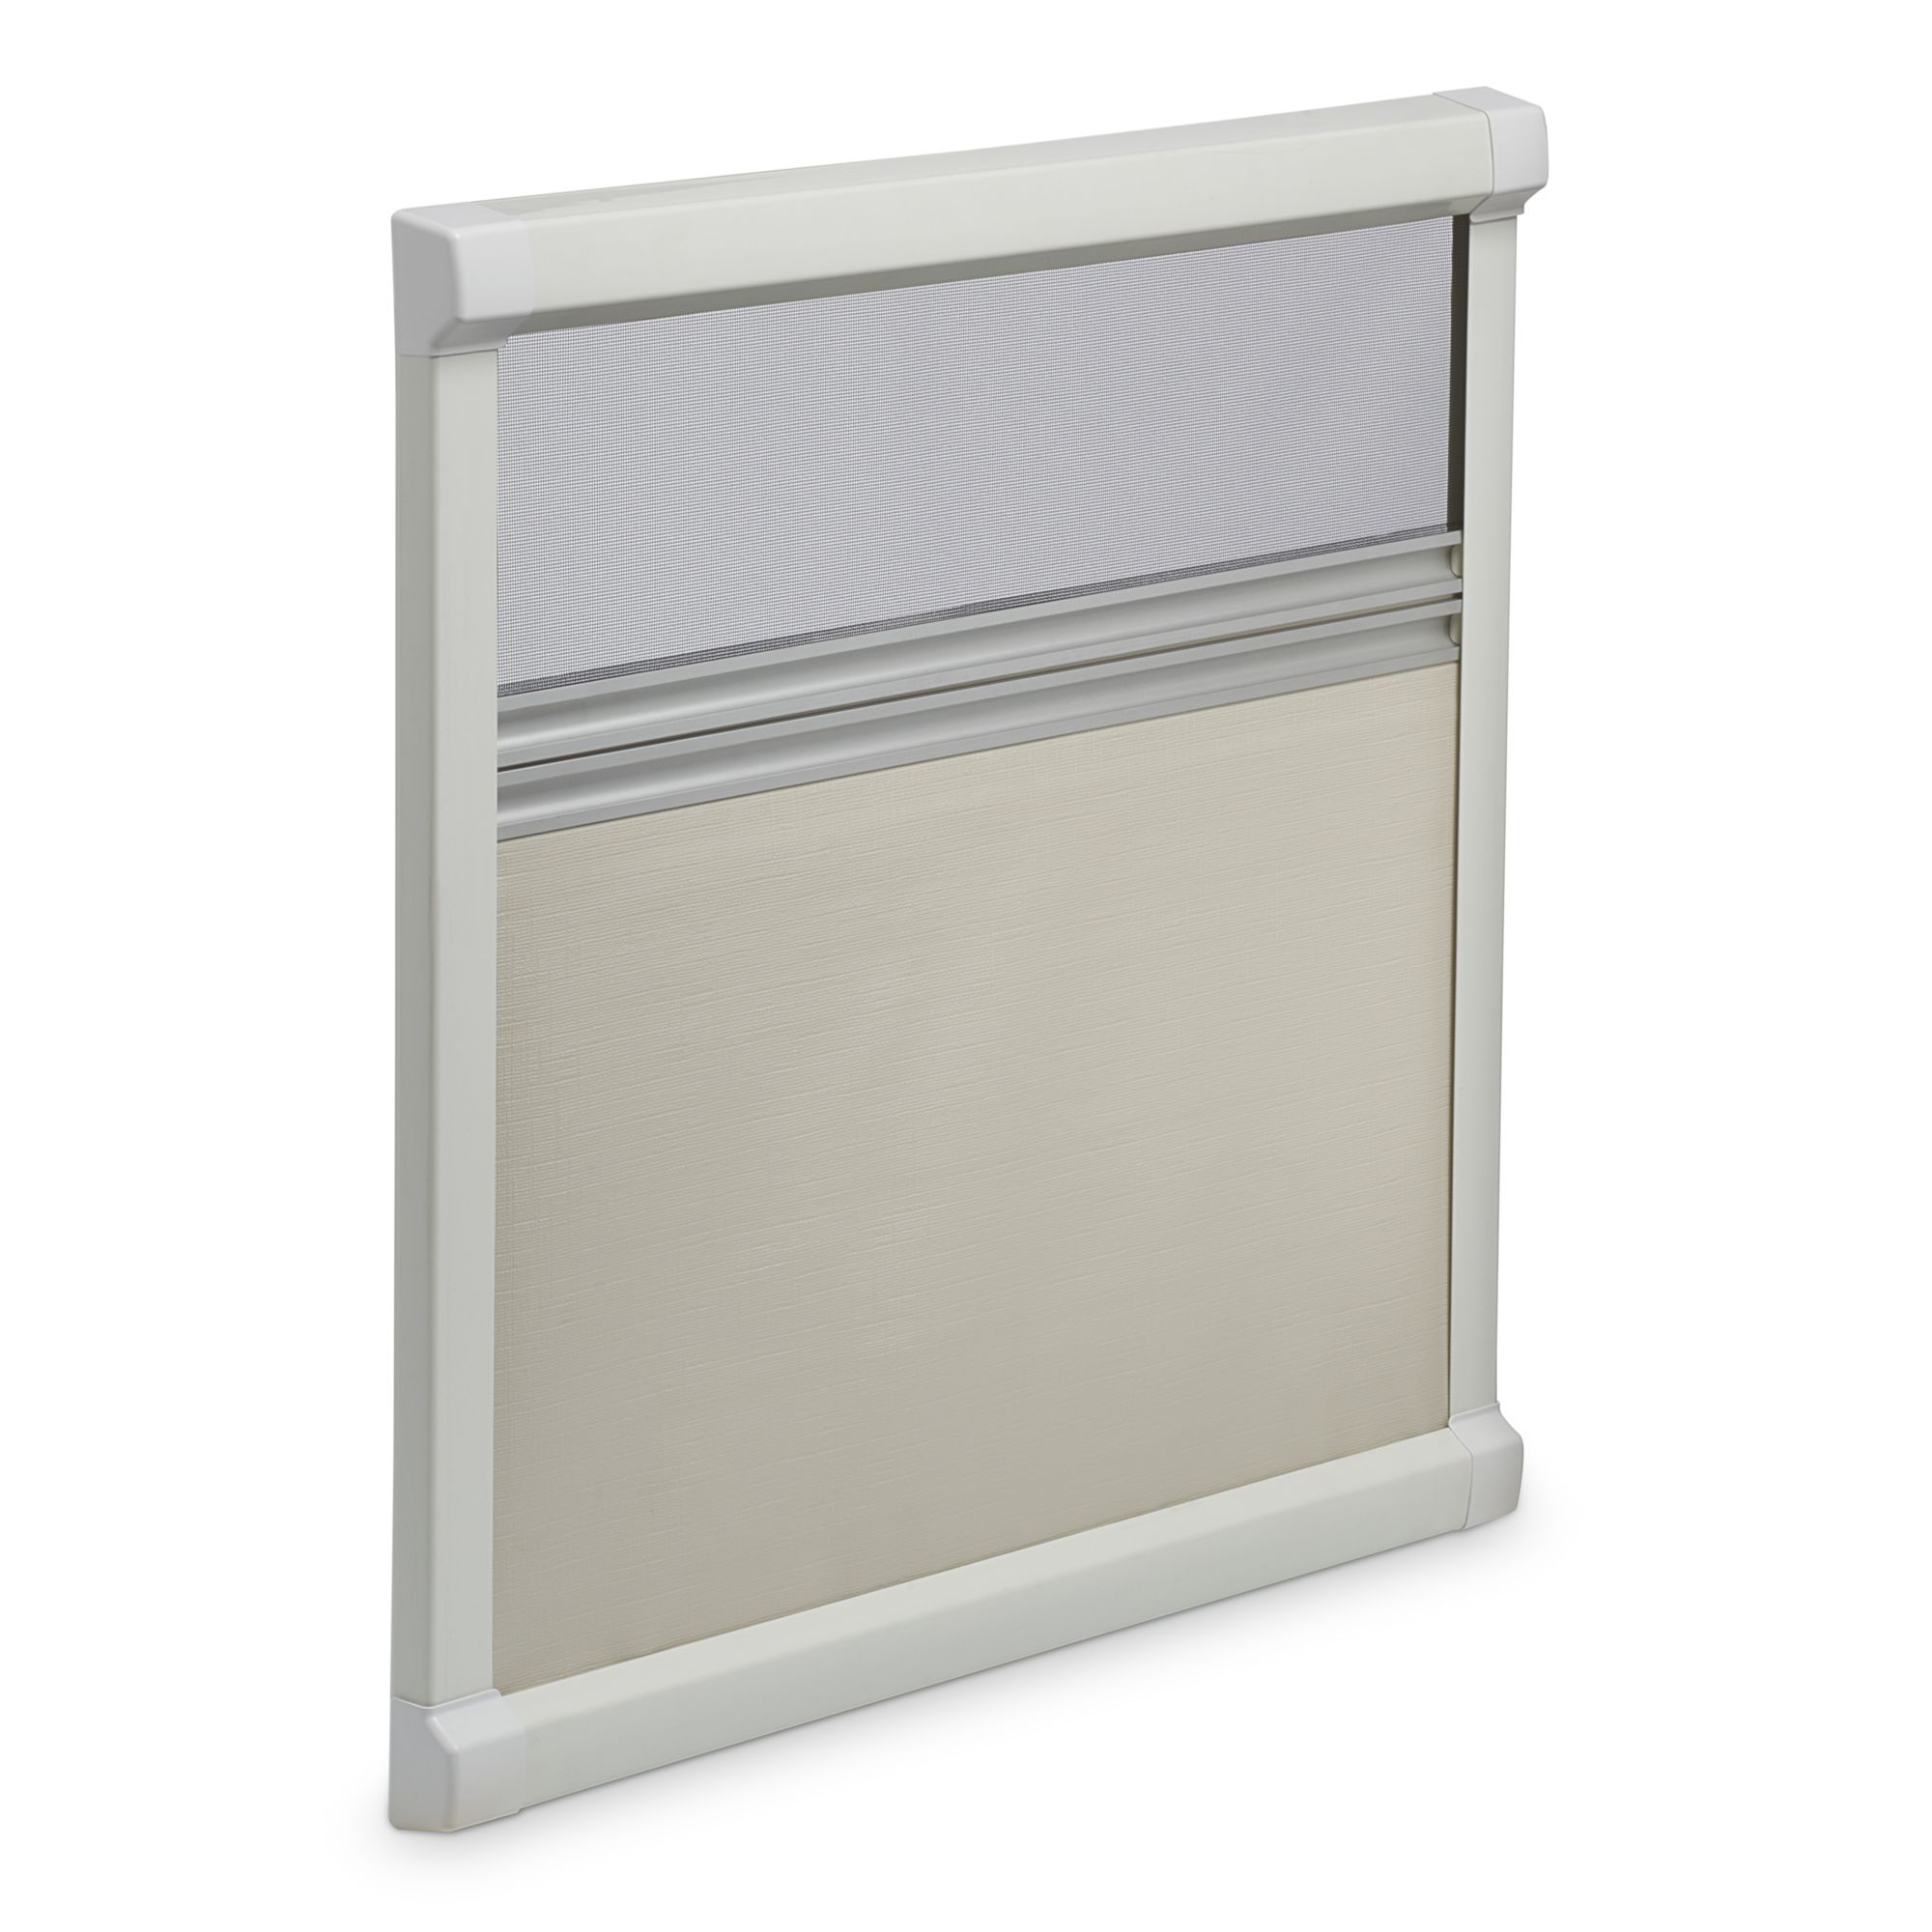 Dometic DB1R Rooflight Roller Blind, 510 x 580 mm, cream-white